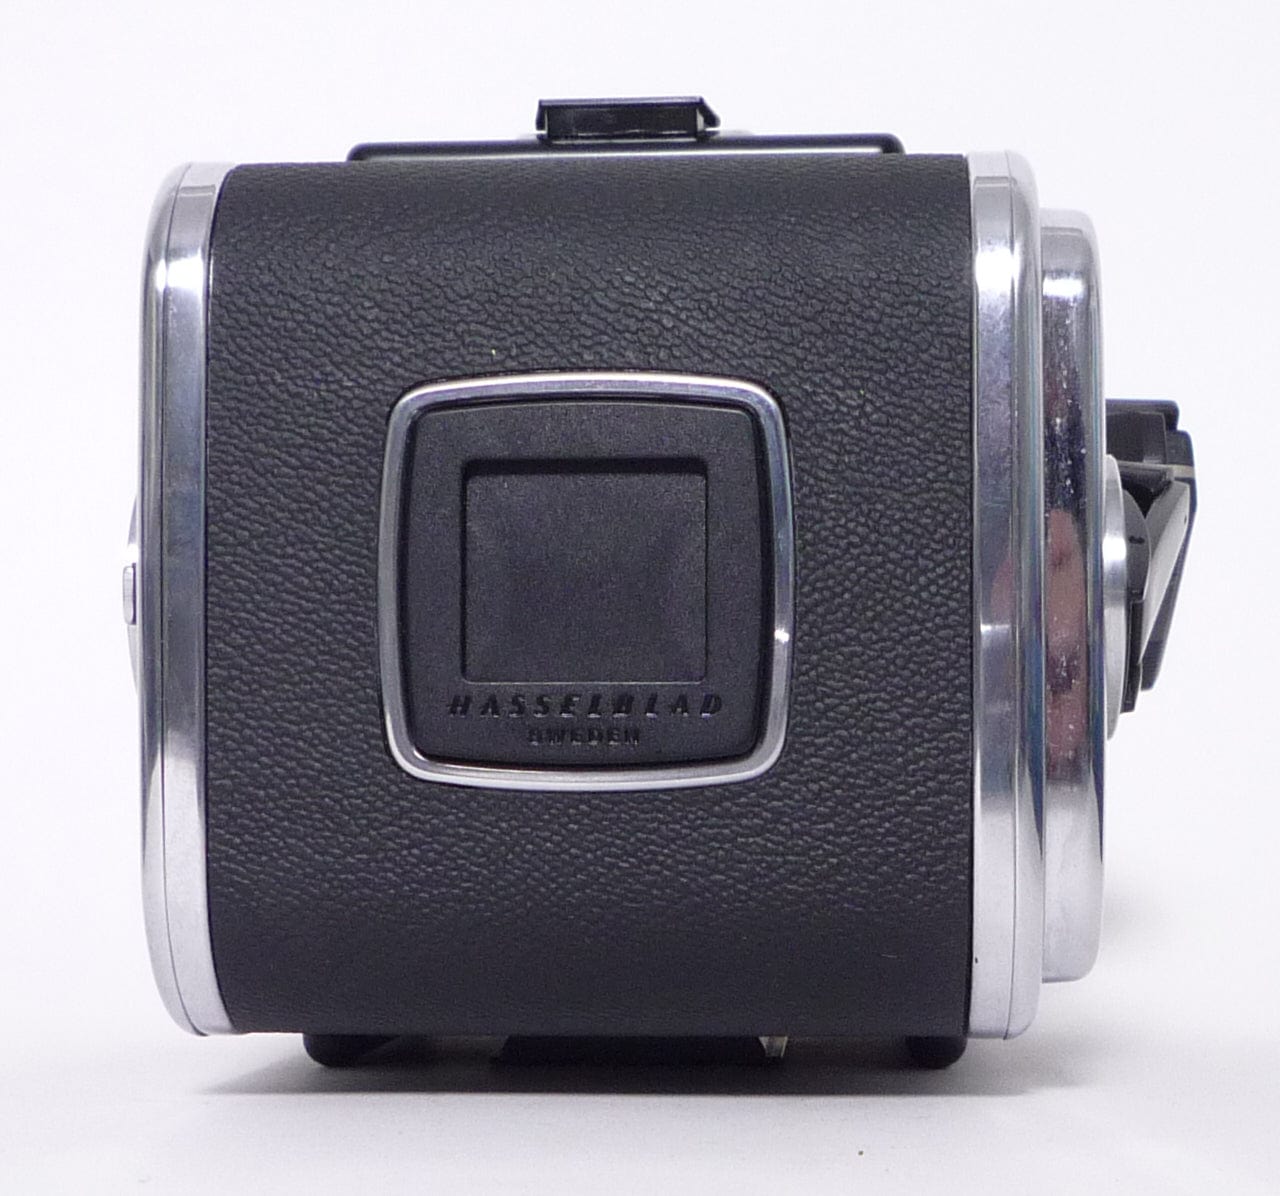 Hasselblad 503CW Black with Waist Level and A12 Magazine Chrome and 80mm  F2.8 Planar Lens